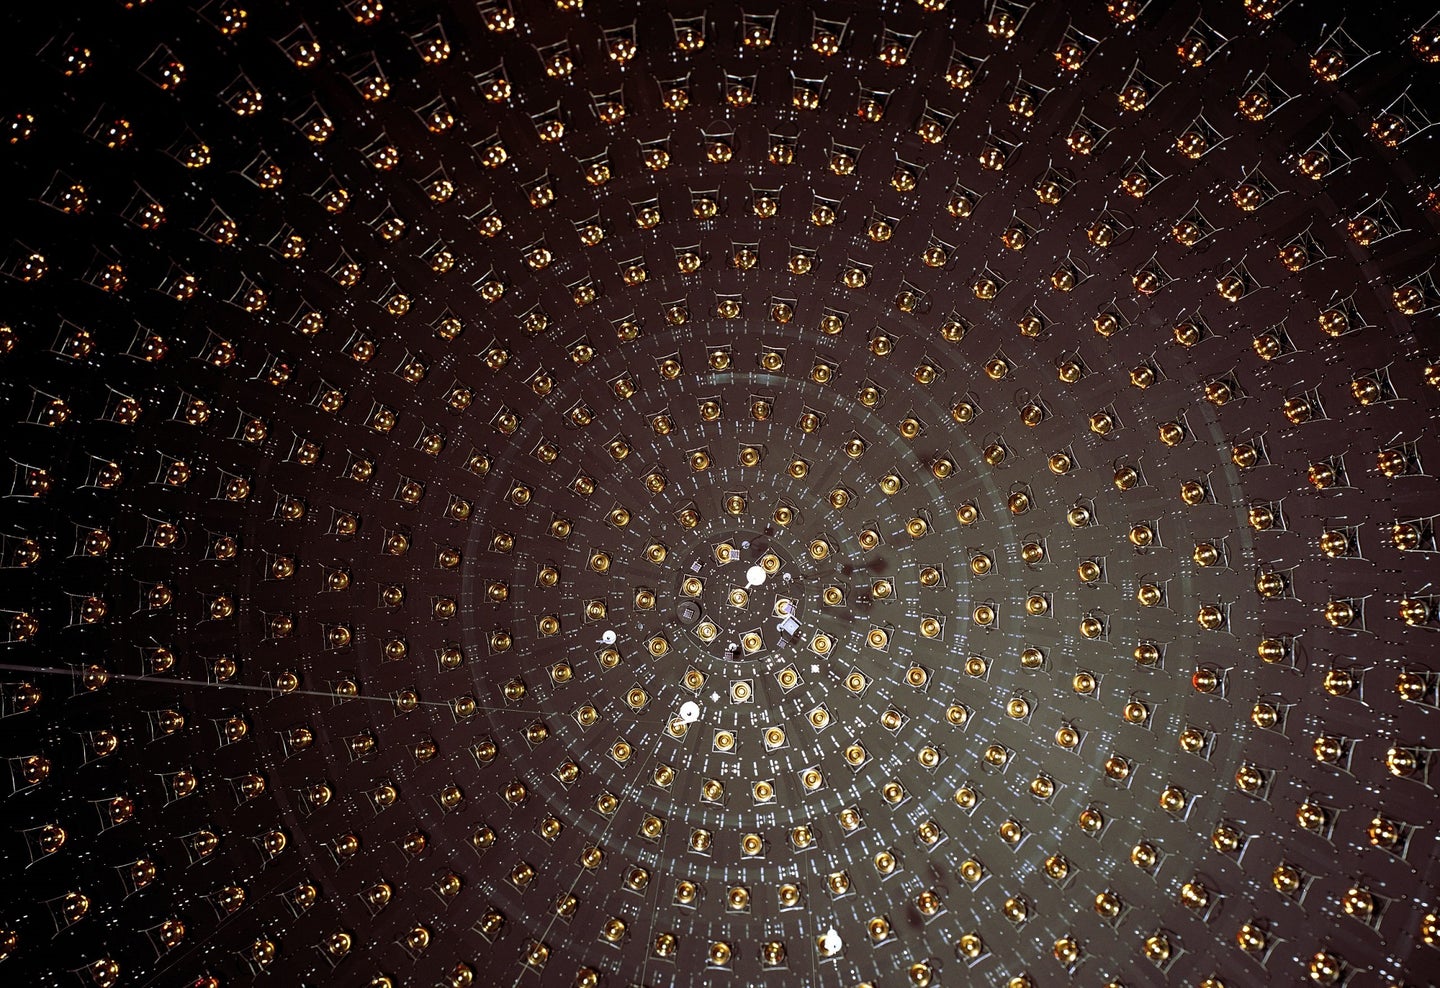 Photodetectors in a circular array in a large neutrino detector experiment at Fermilab